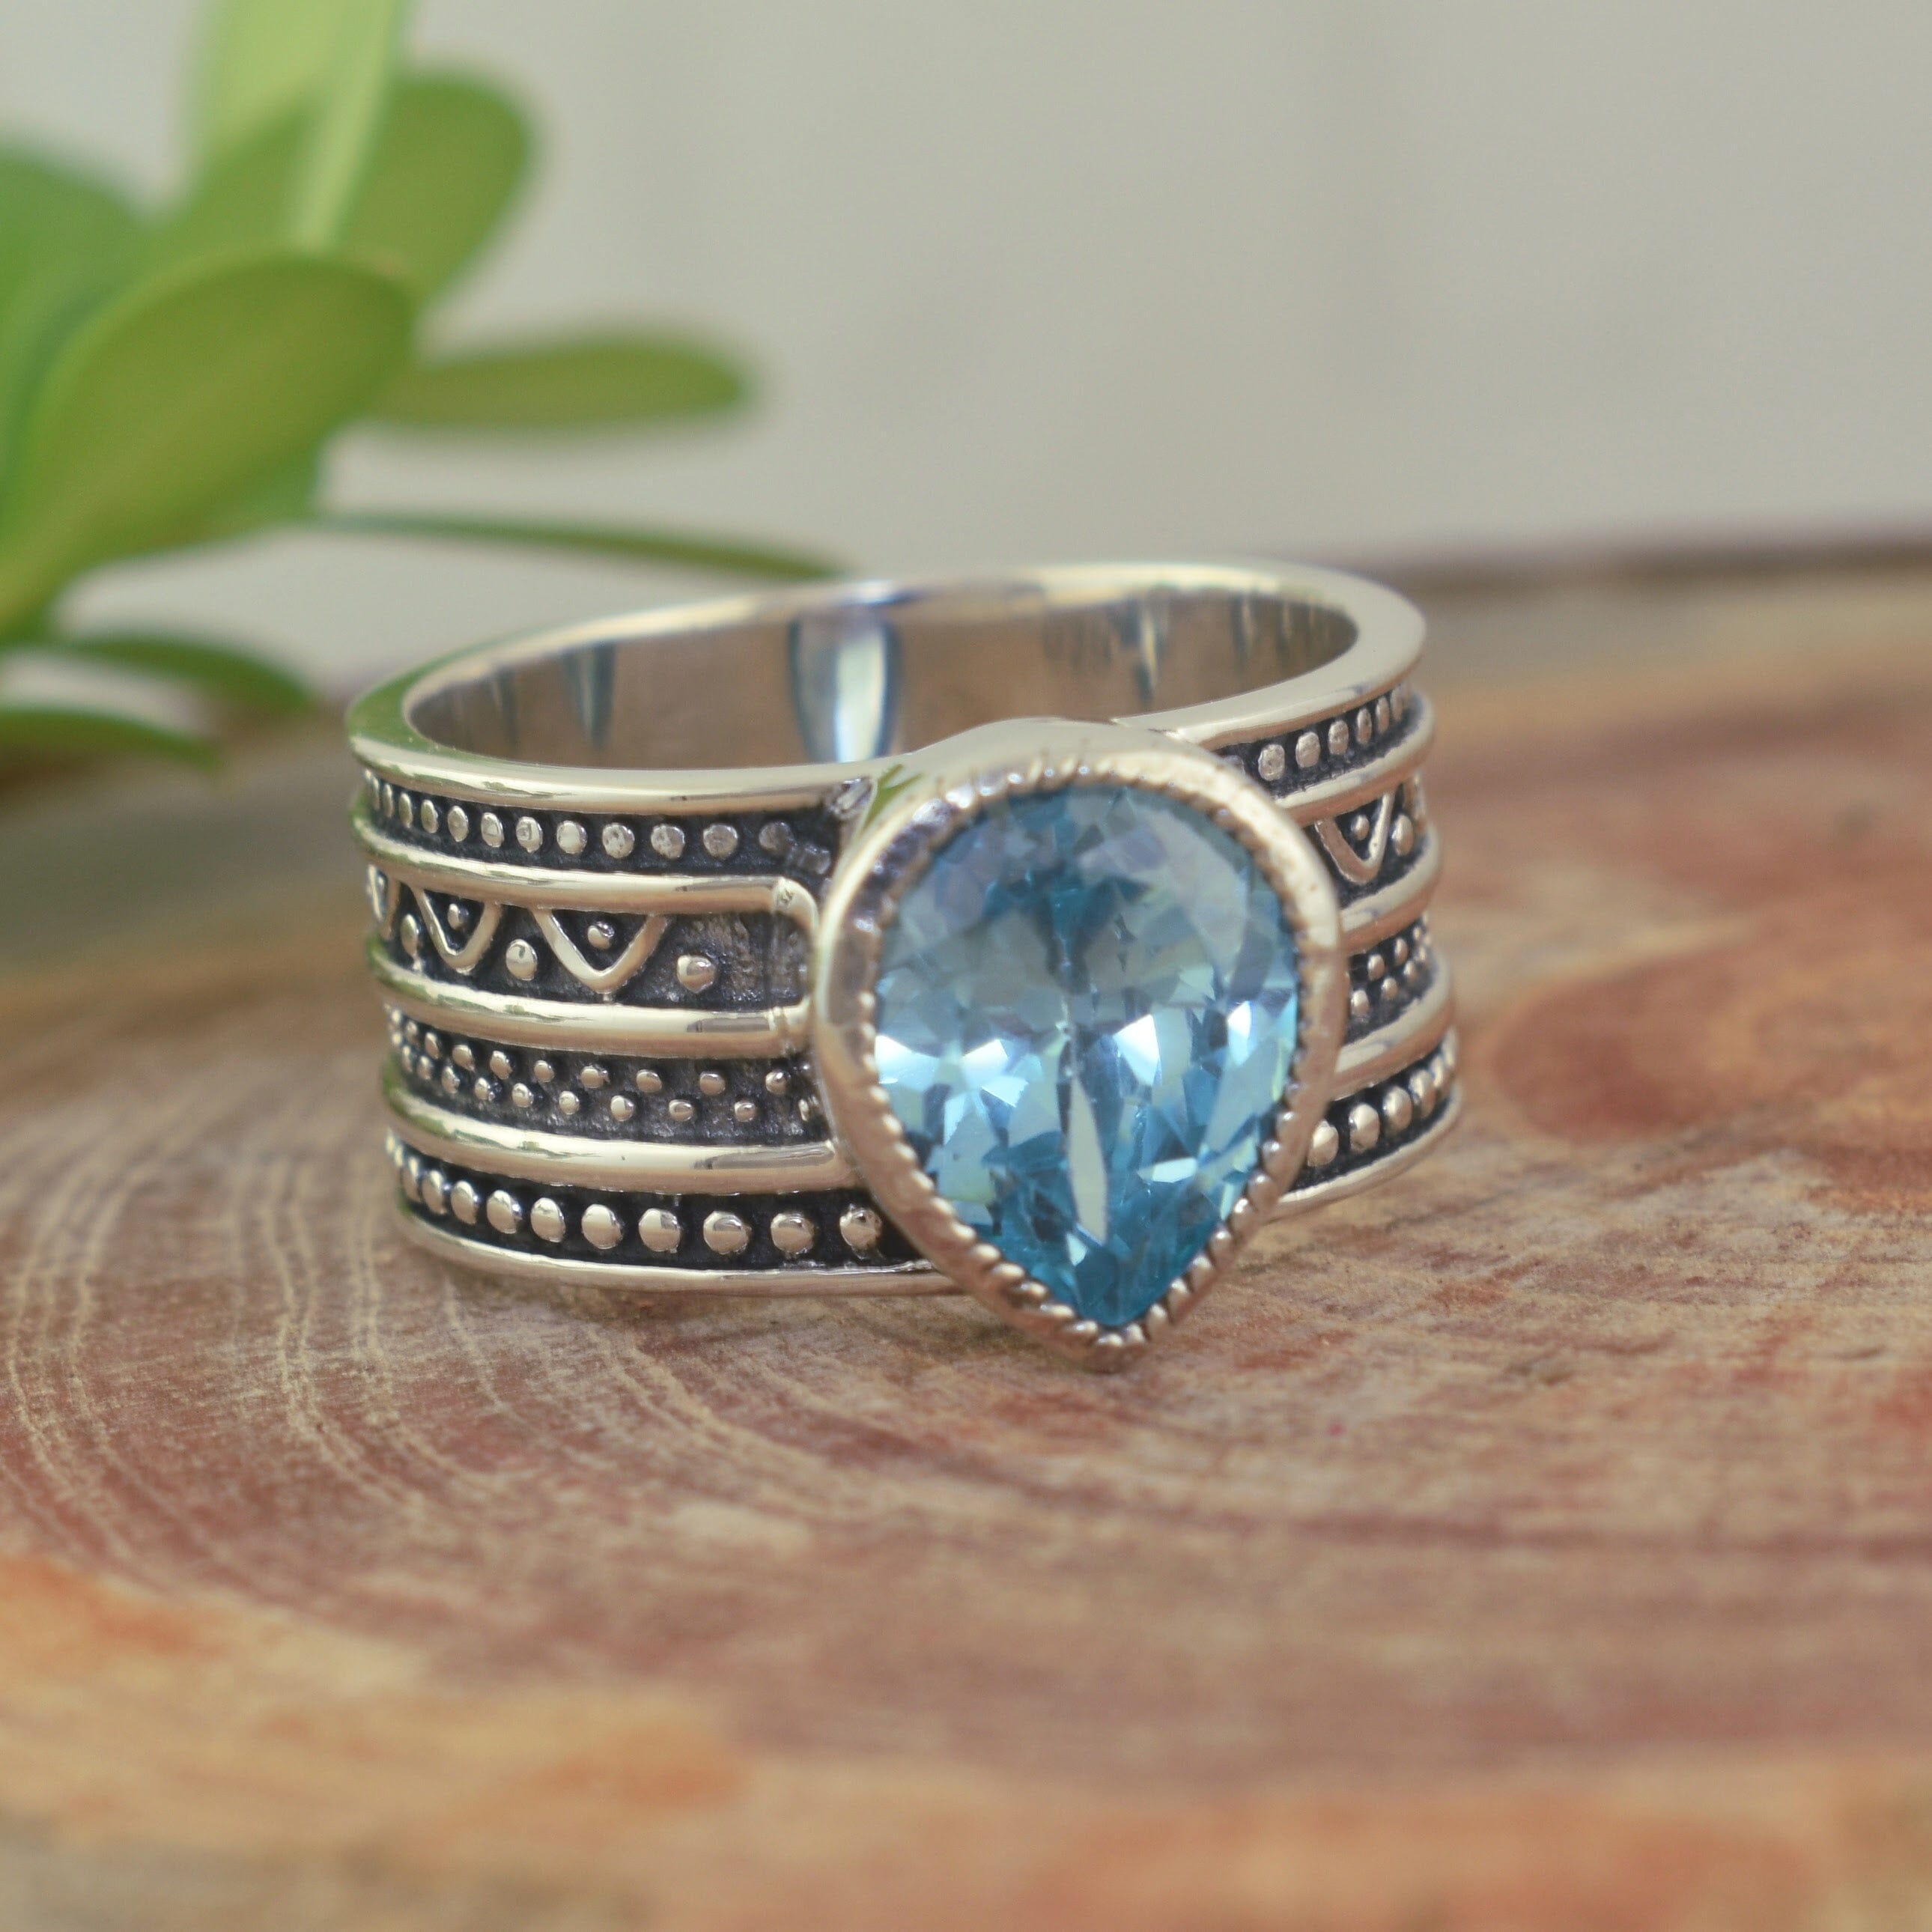 .925 sterling silver wide band ring with pear-shaped swiss blue cubic zirconia stone